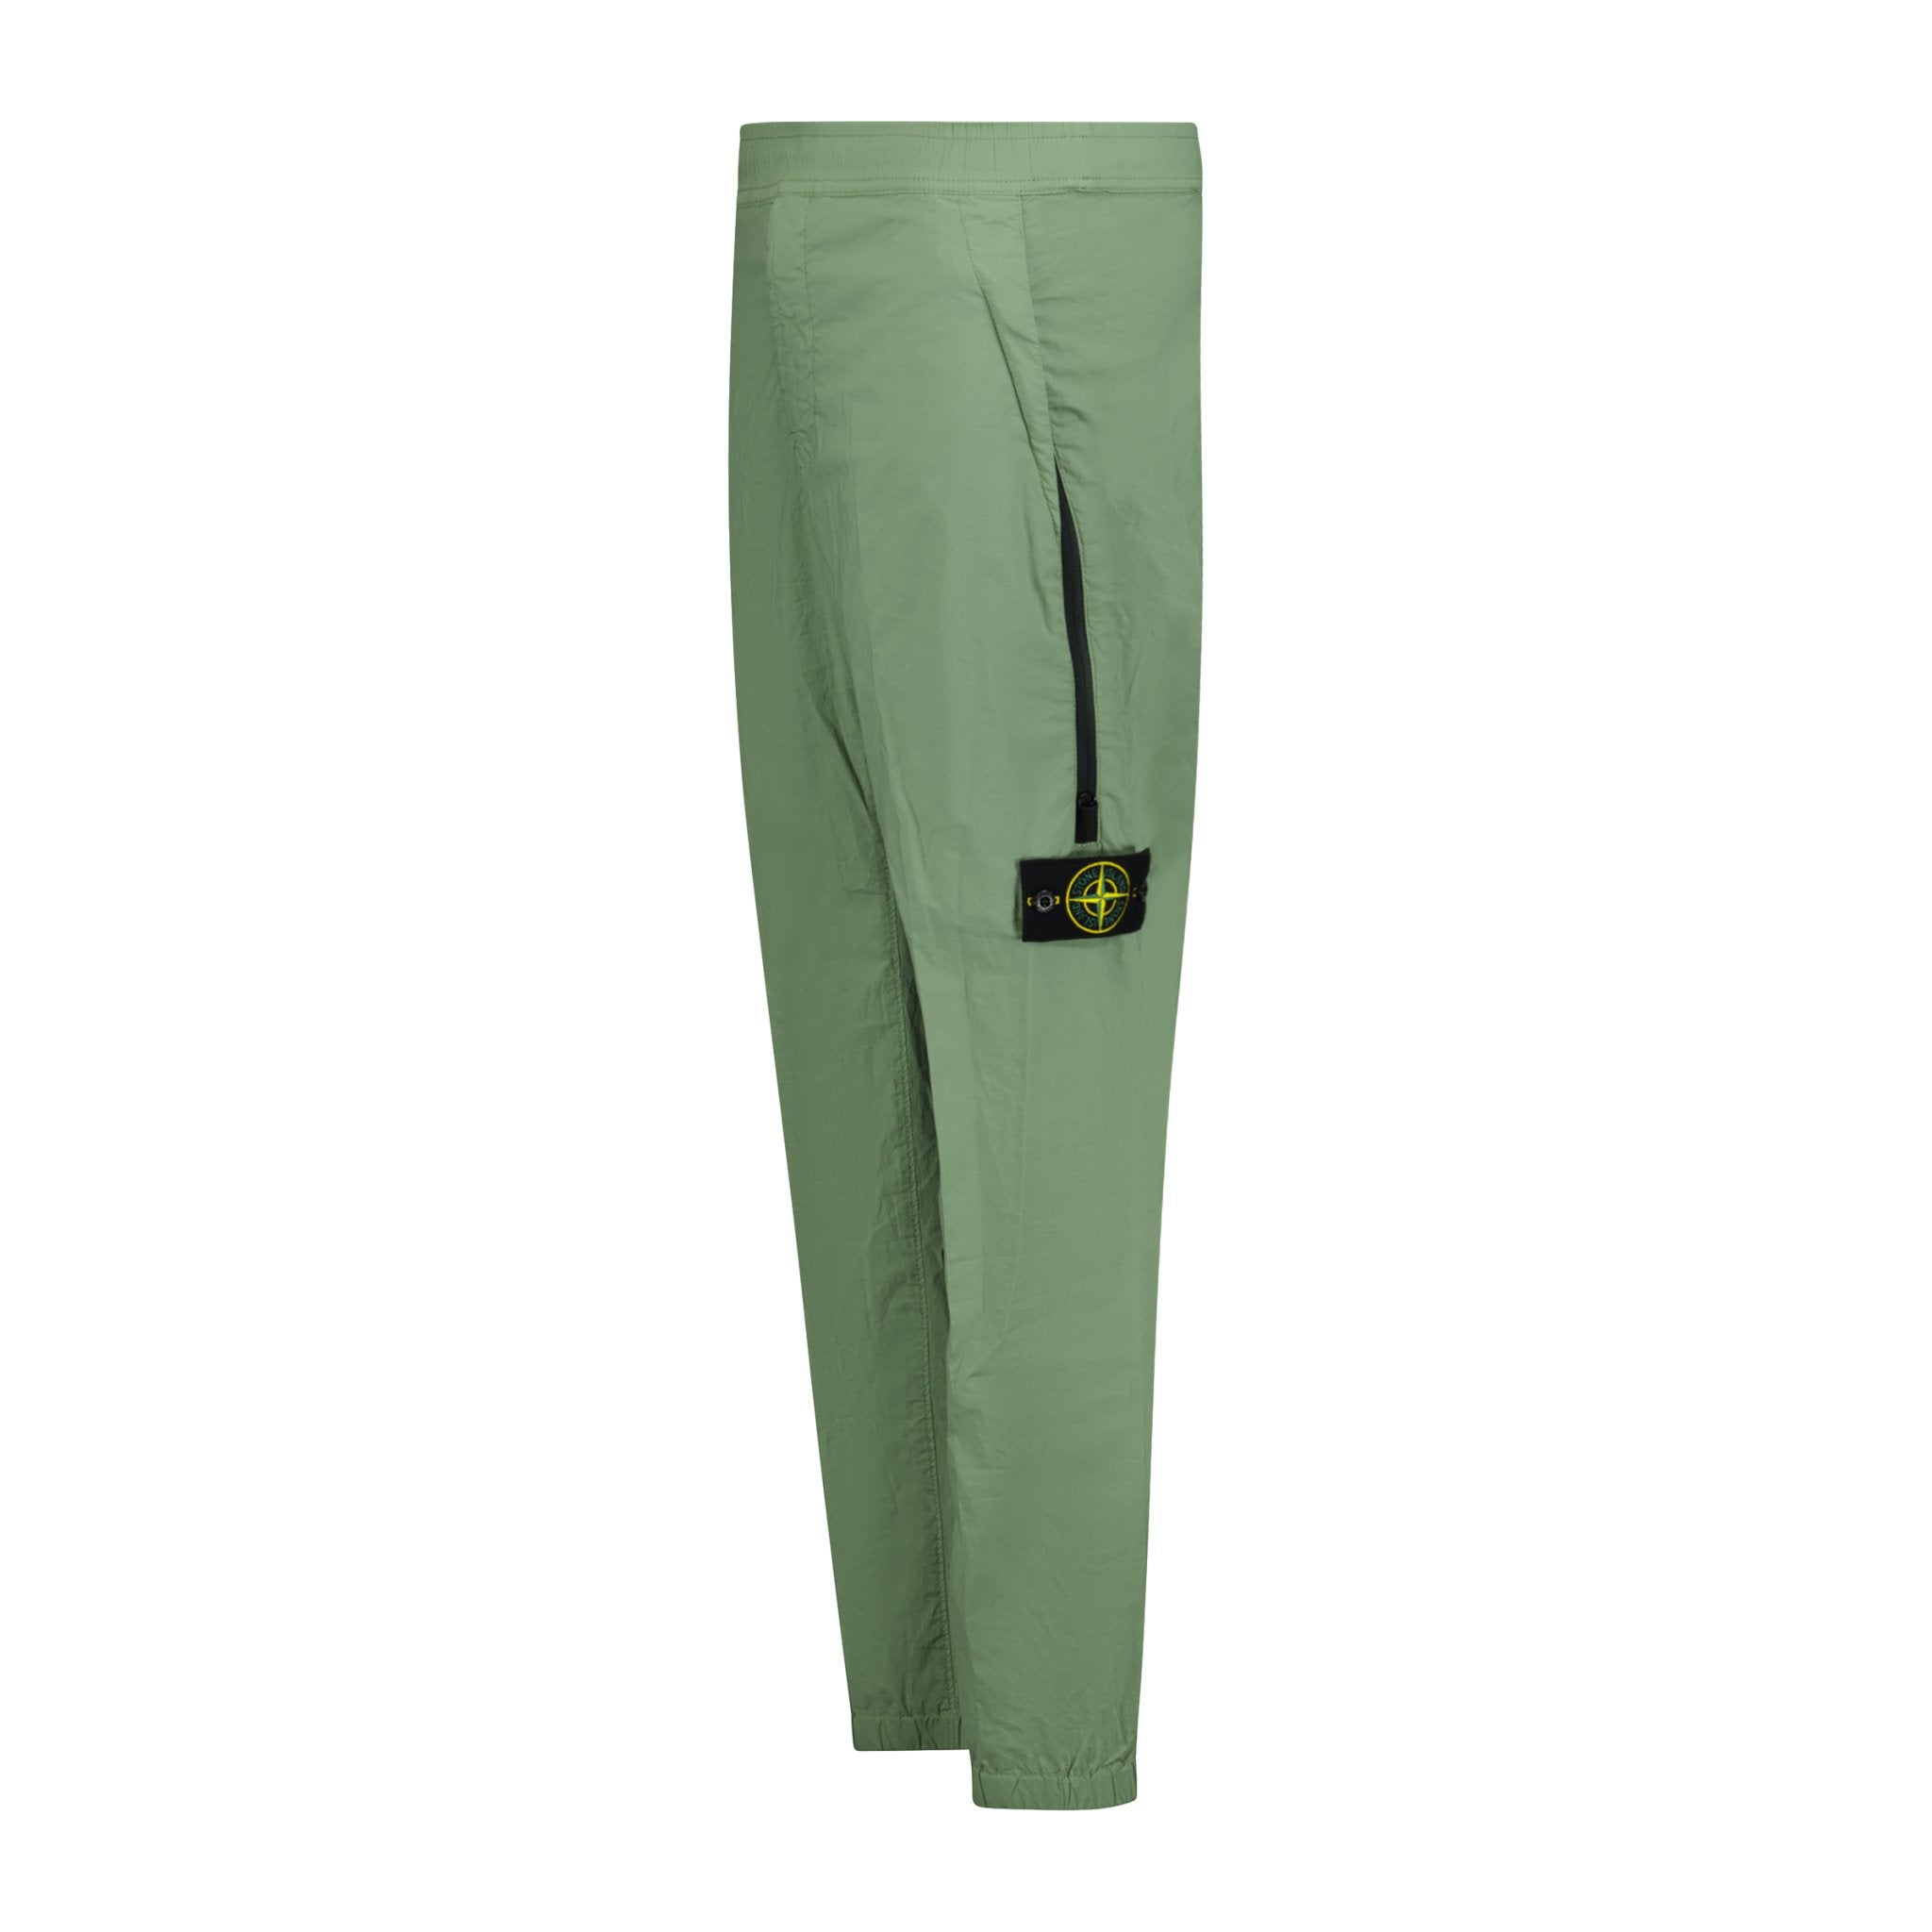 Cotton cargo pant in green